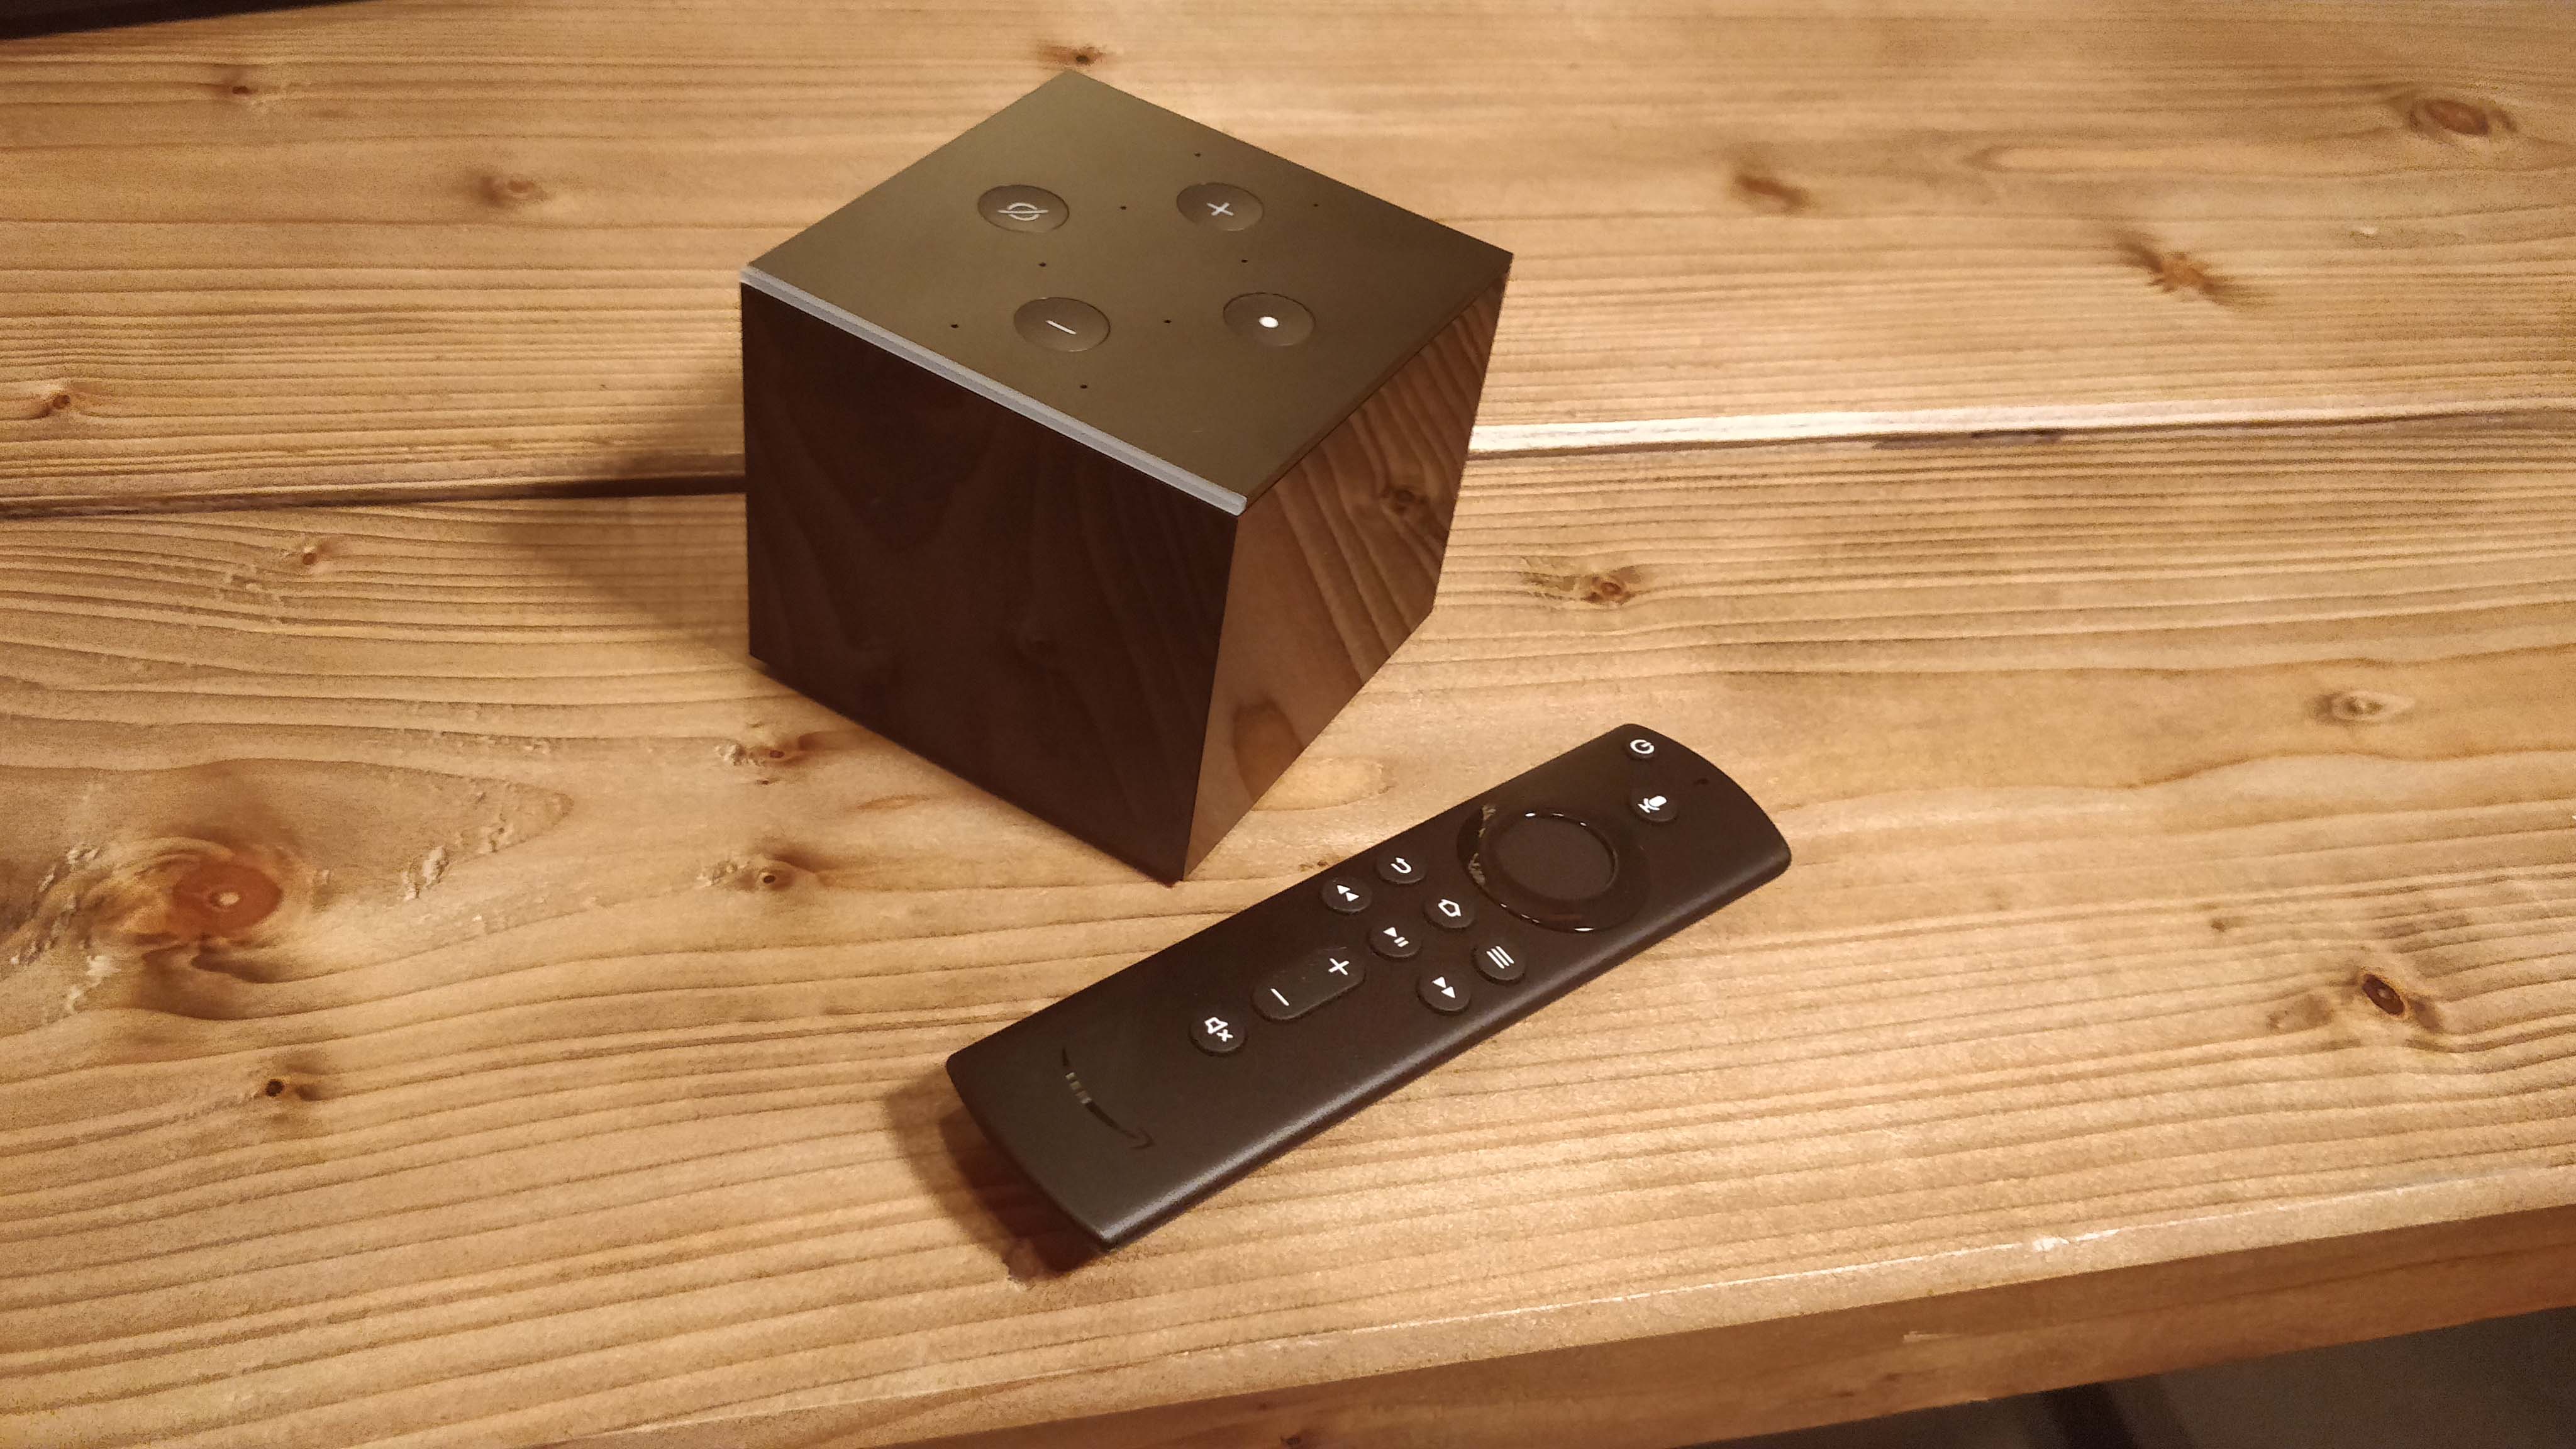 Fire TV Cube review: Streamlined and speedy entertainment